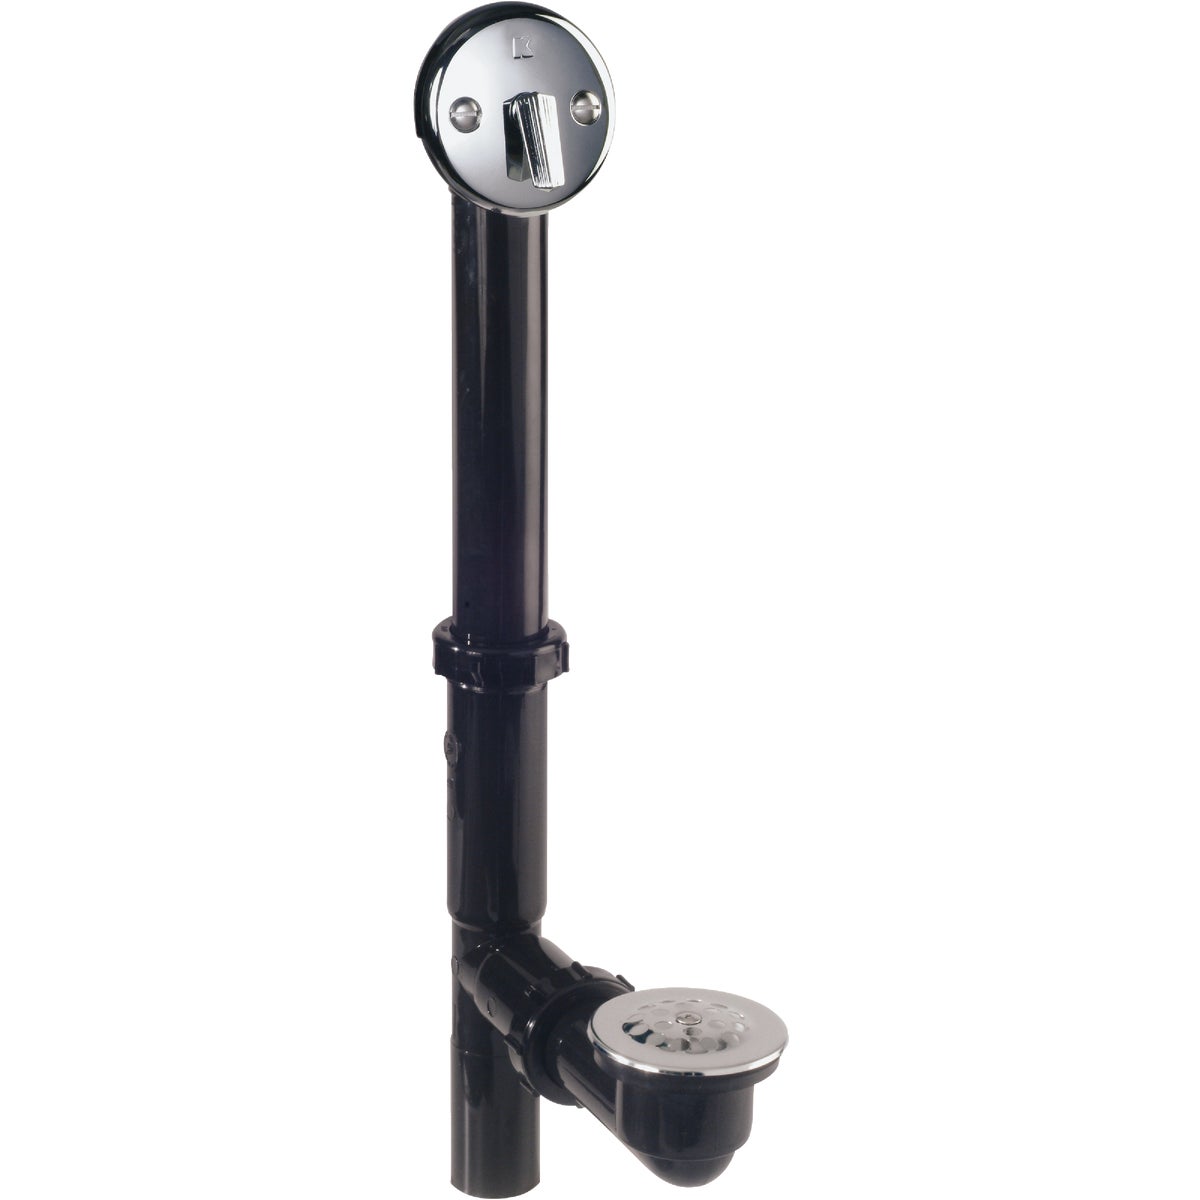 Keeney Black Plastic Trip Lever Bath Drain with Polished Chrome Trim and Strainer & Dome Grid